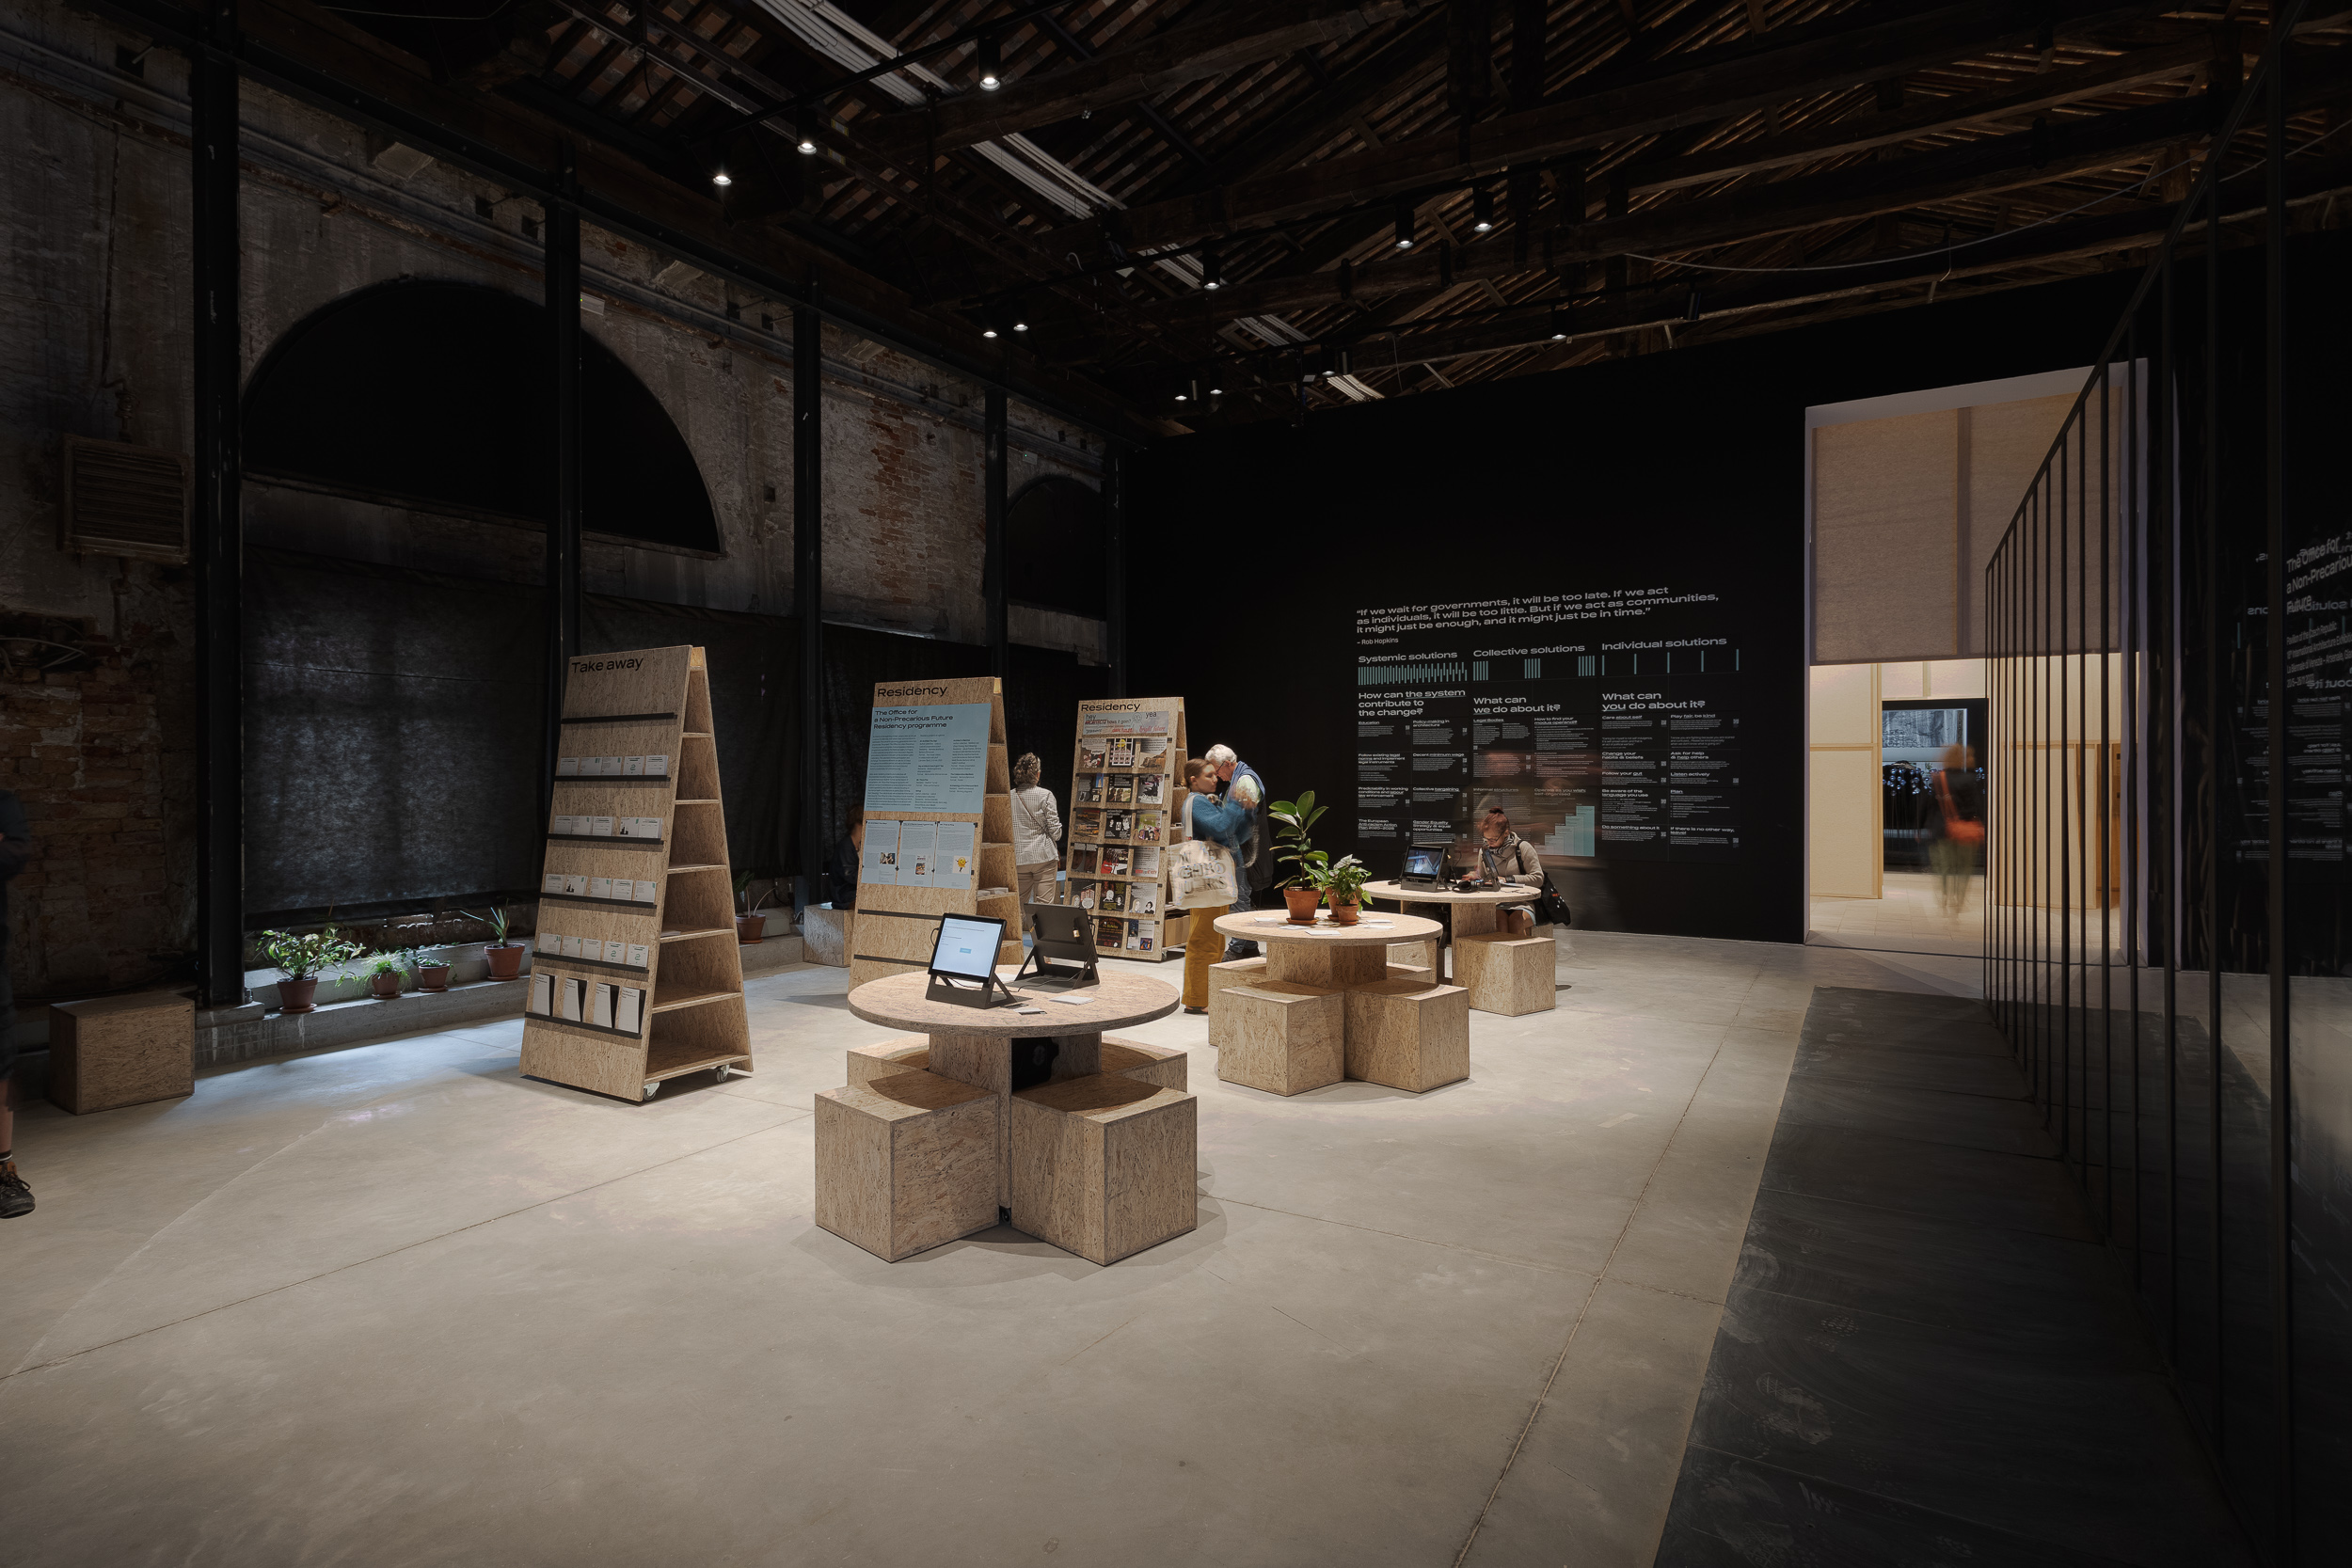 Exhibition at Architecture Biennale in Venice